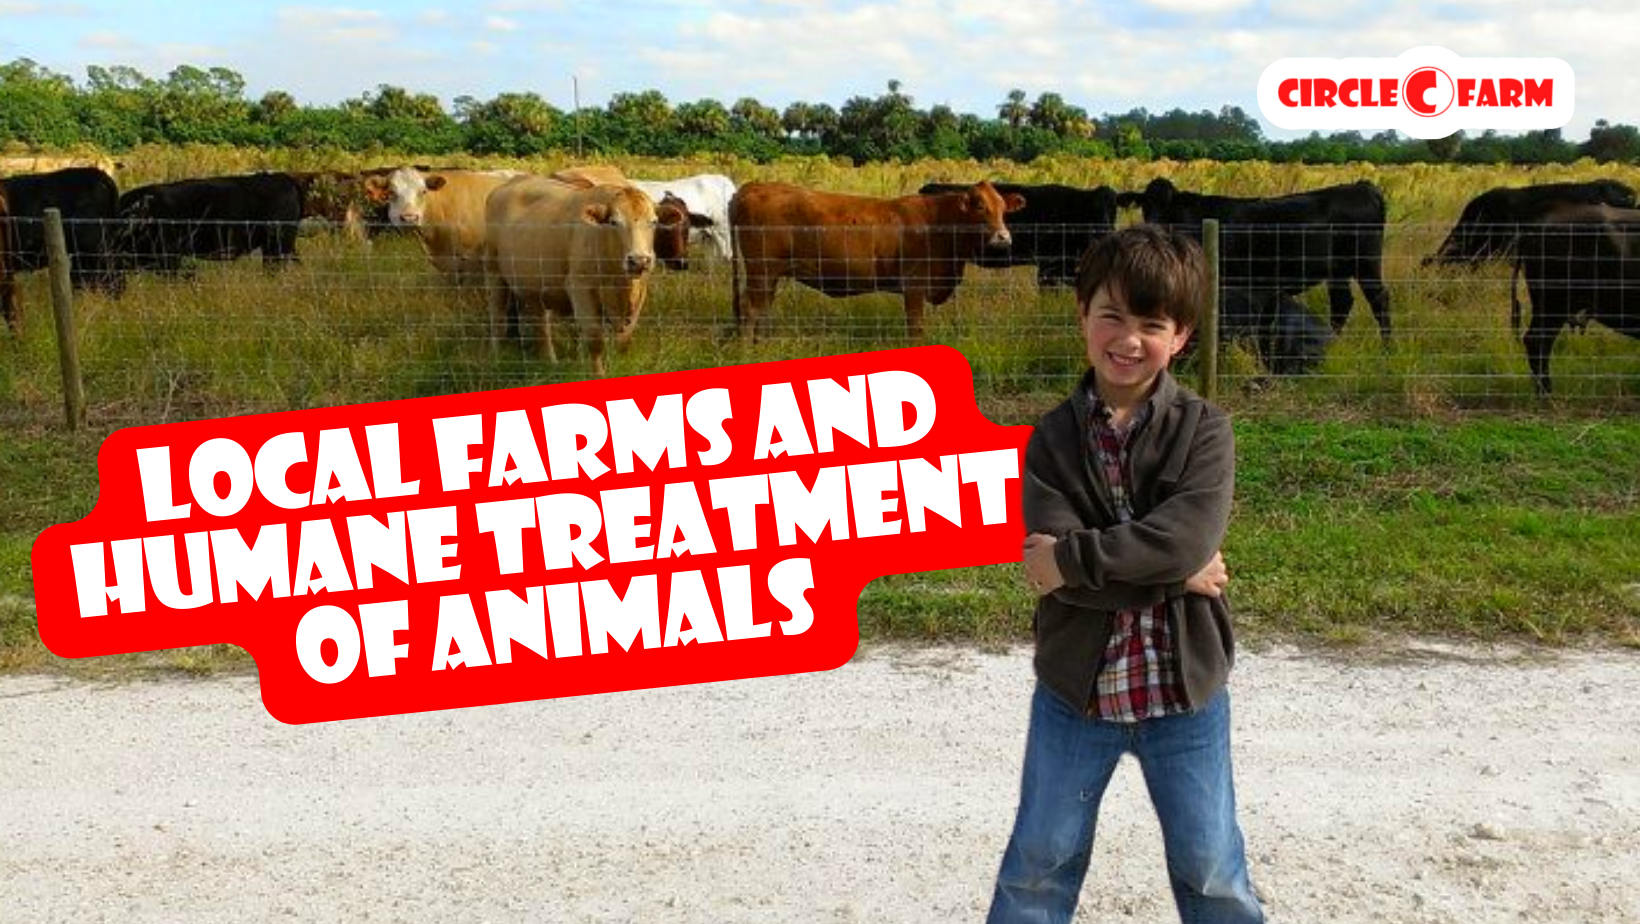 The role of small and local farms in promoting humane treatment of animals